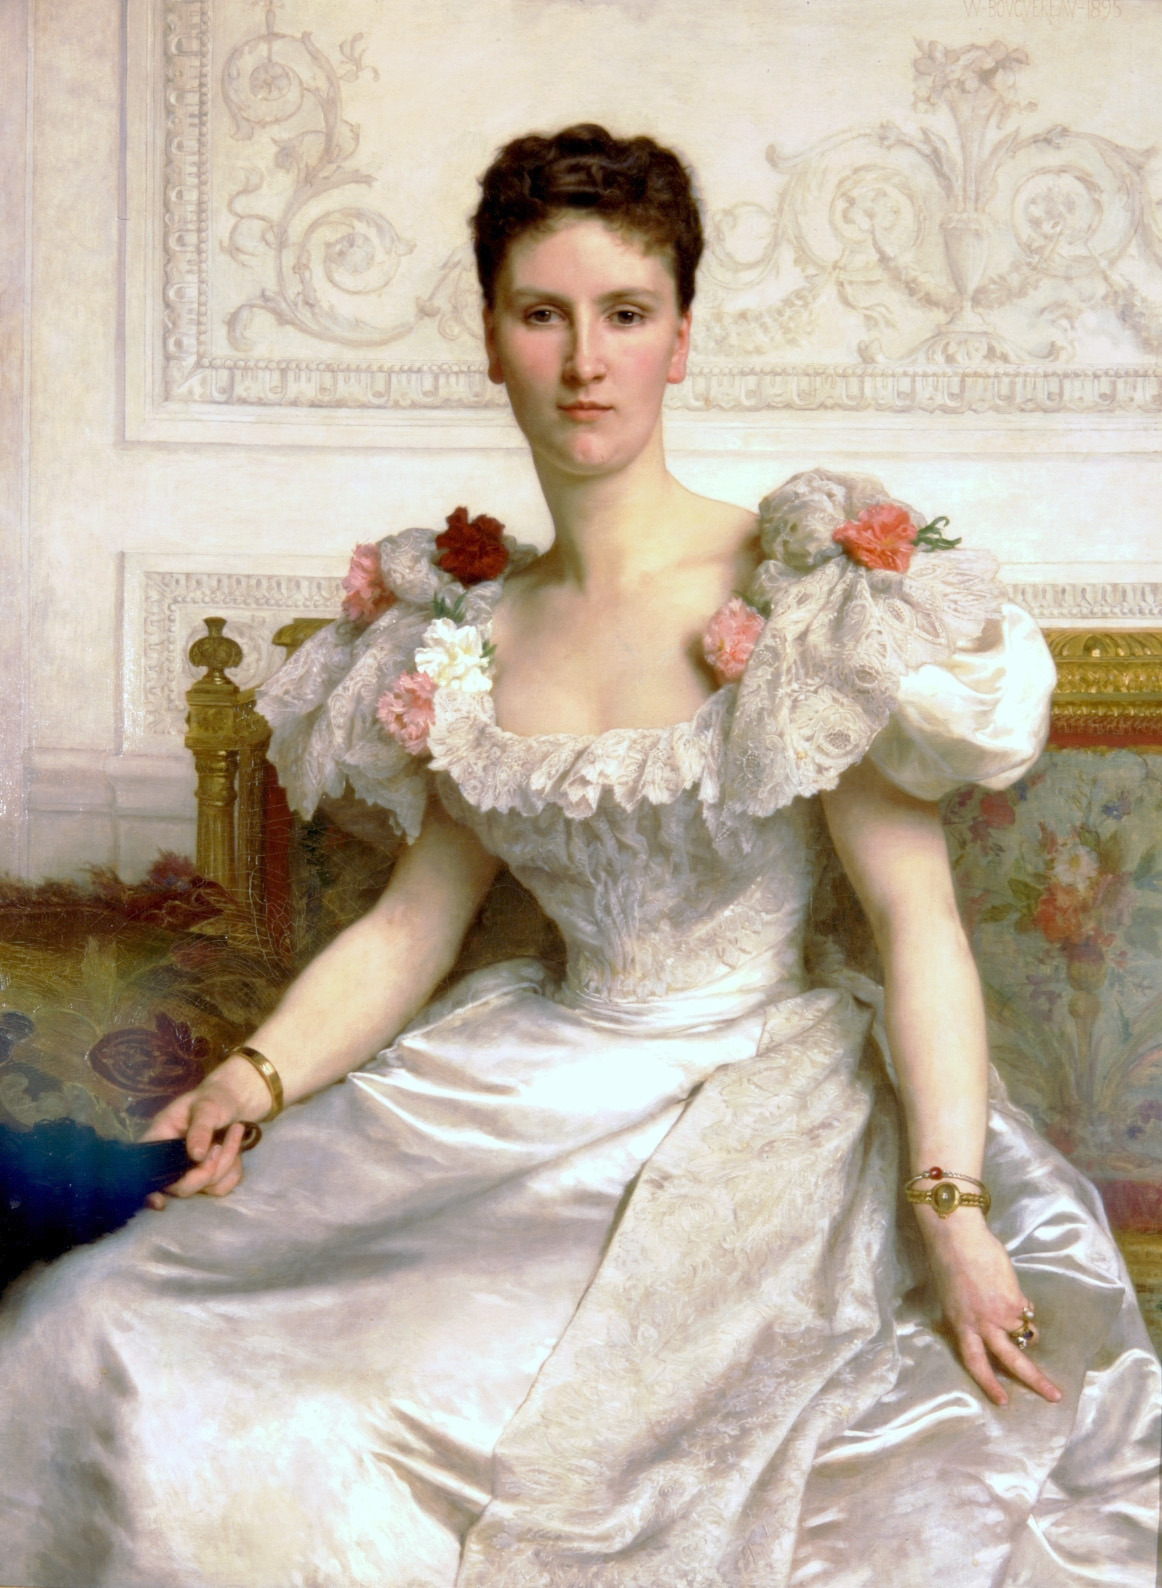 Portrait of Madame la Comtesse de Cambaceres (1895). William Bouguereau (French, 1825-1905). Oil on canvas. Seattle Art Museum.
Louise de Rohan Chabot was born in Paris in 1860 and married the Count of Cambacérès in 1886. While working on this...